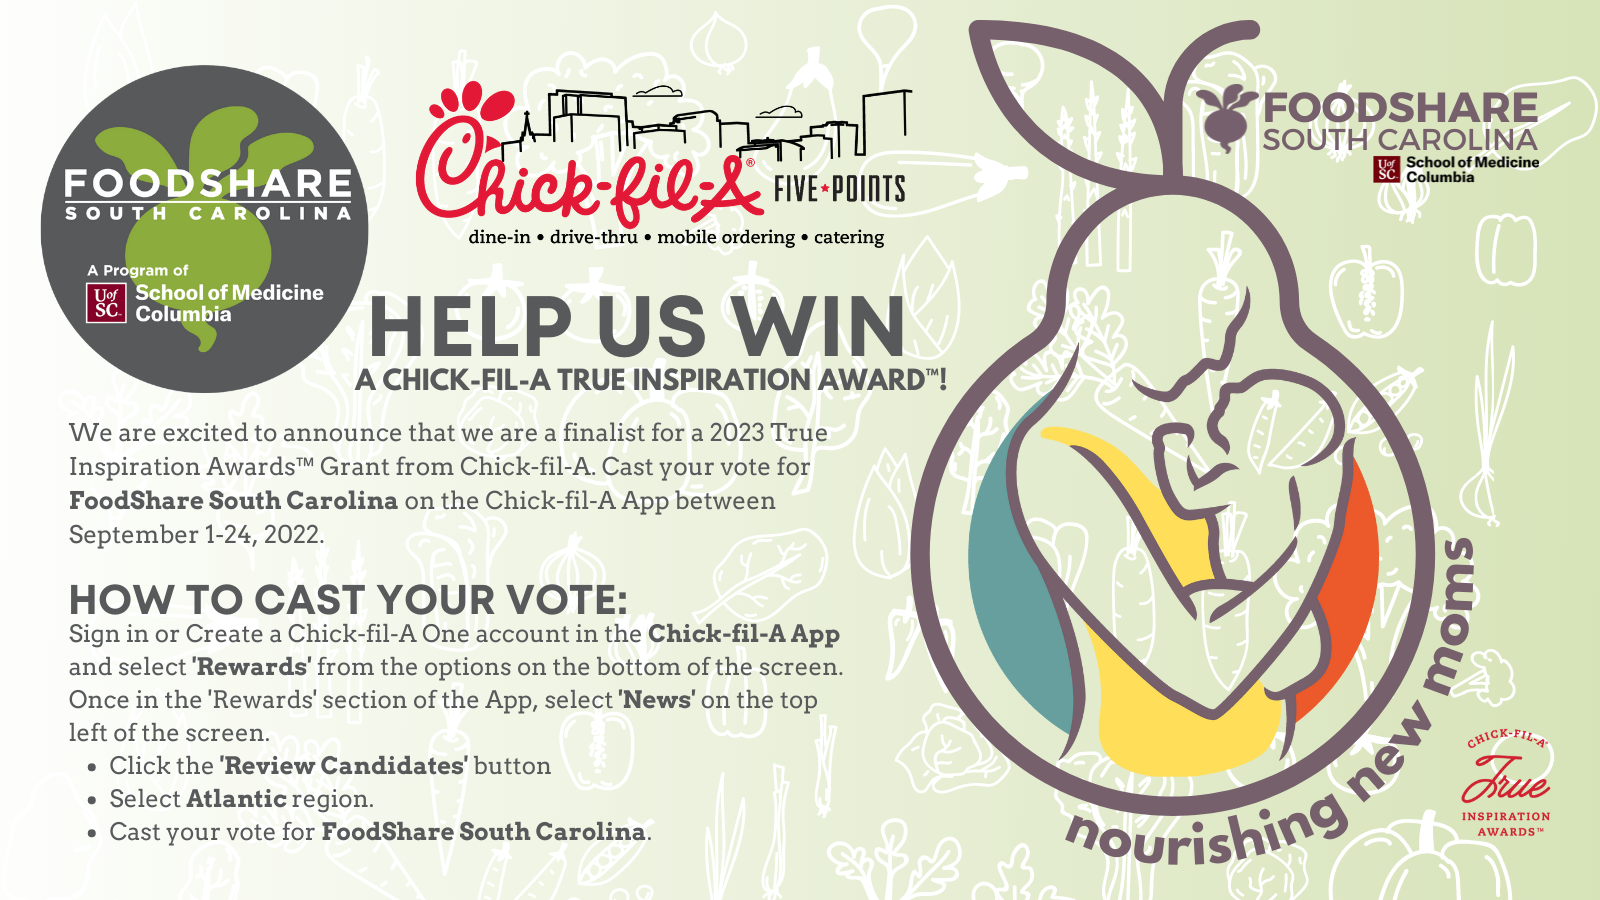 FoodShare South Carolina Selected as Finalist for 2023 Chick-fil-A True Inspiration Award